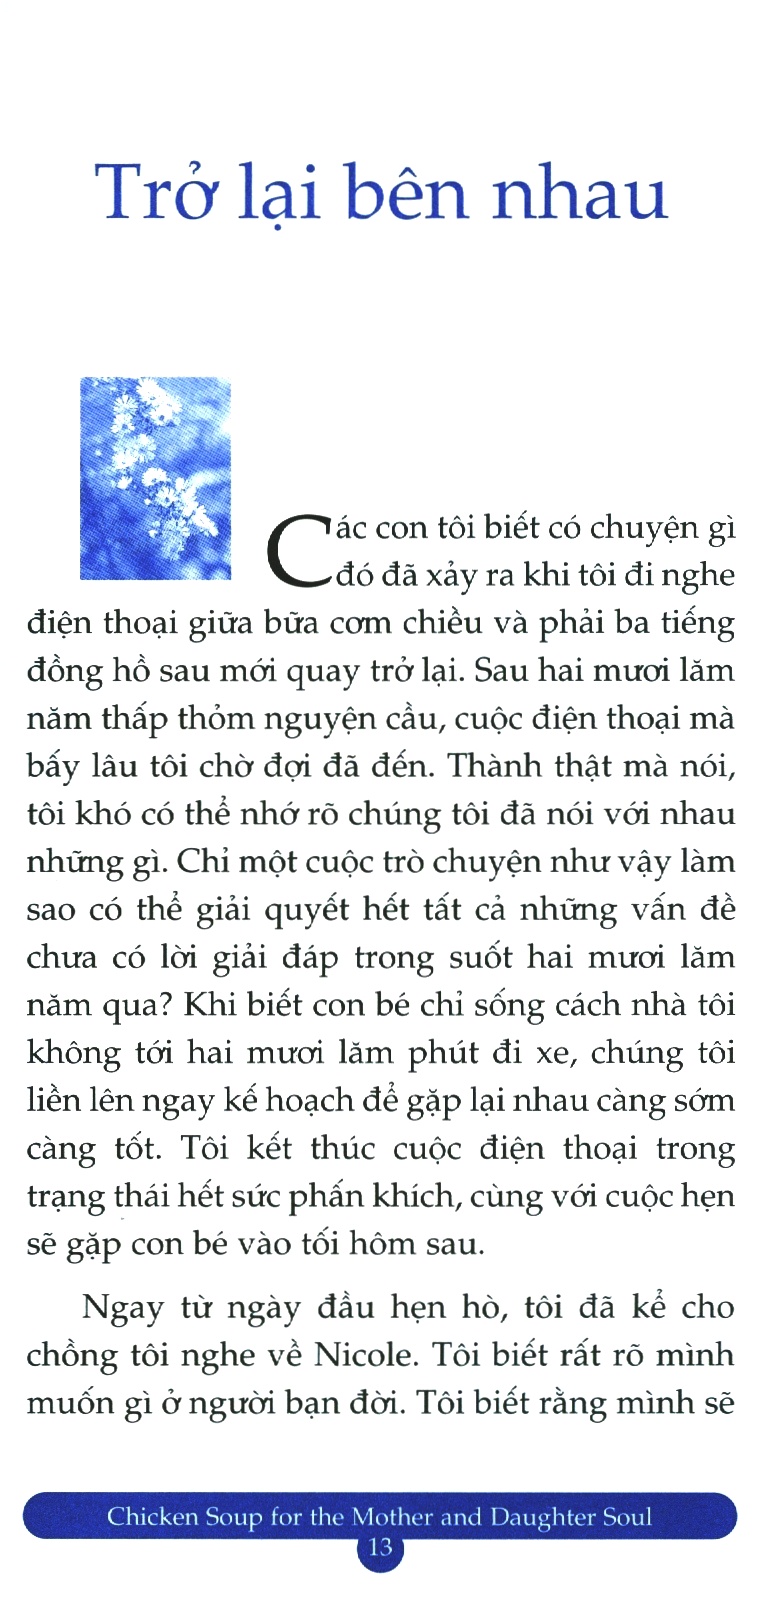 Chicken Soup For The Mother And Daughter 9 - Vòng Tay Của Mẹ PDF